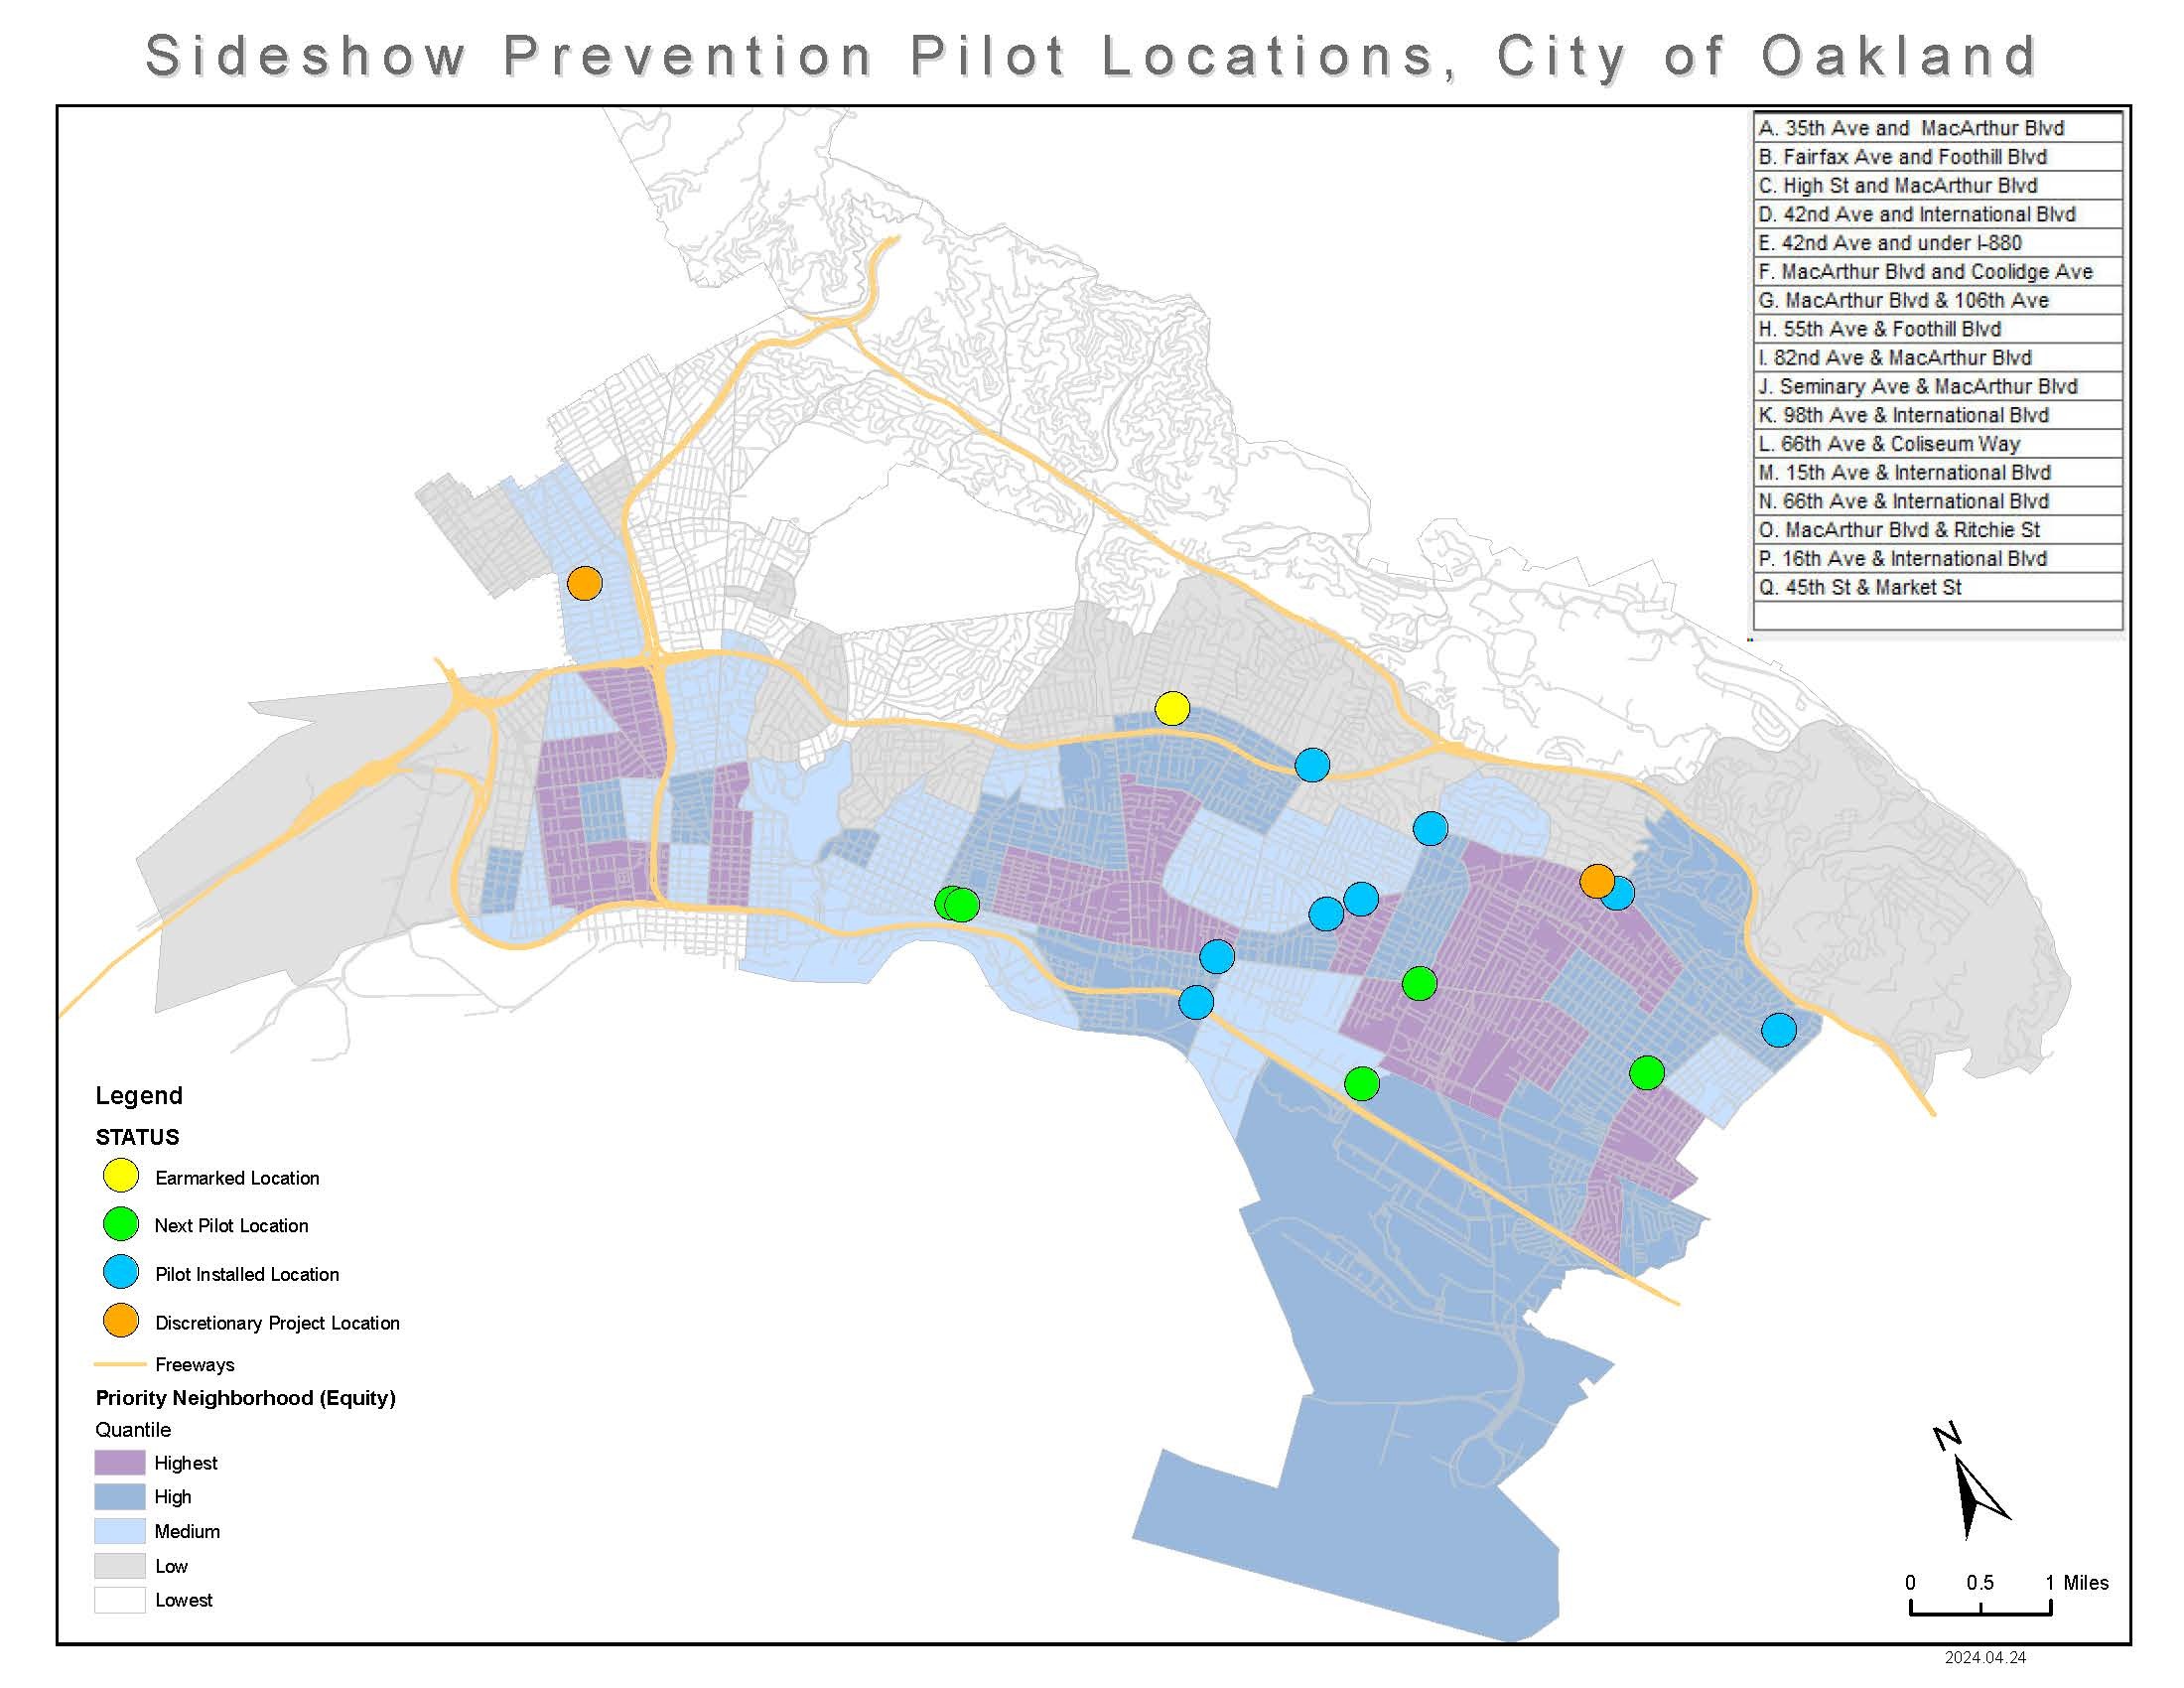 Map of locations where sideshow prevention pilot measures have been installed.